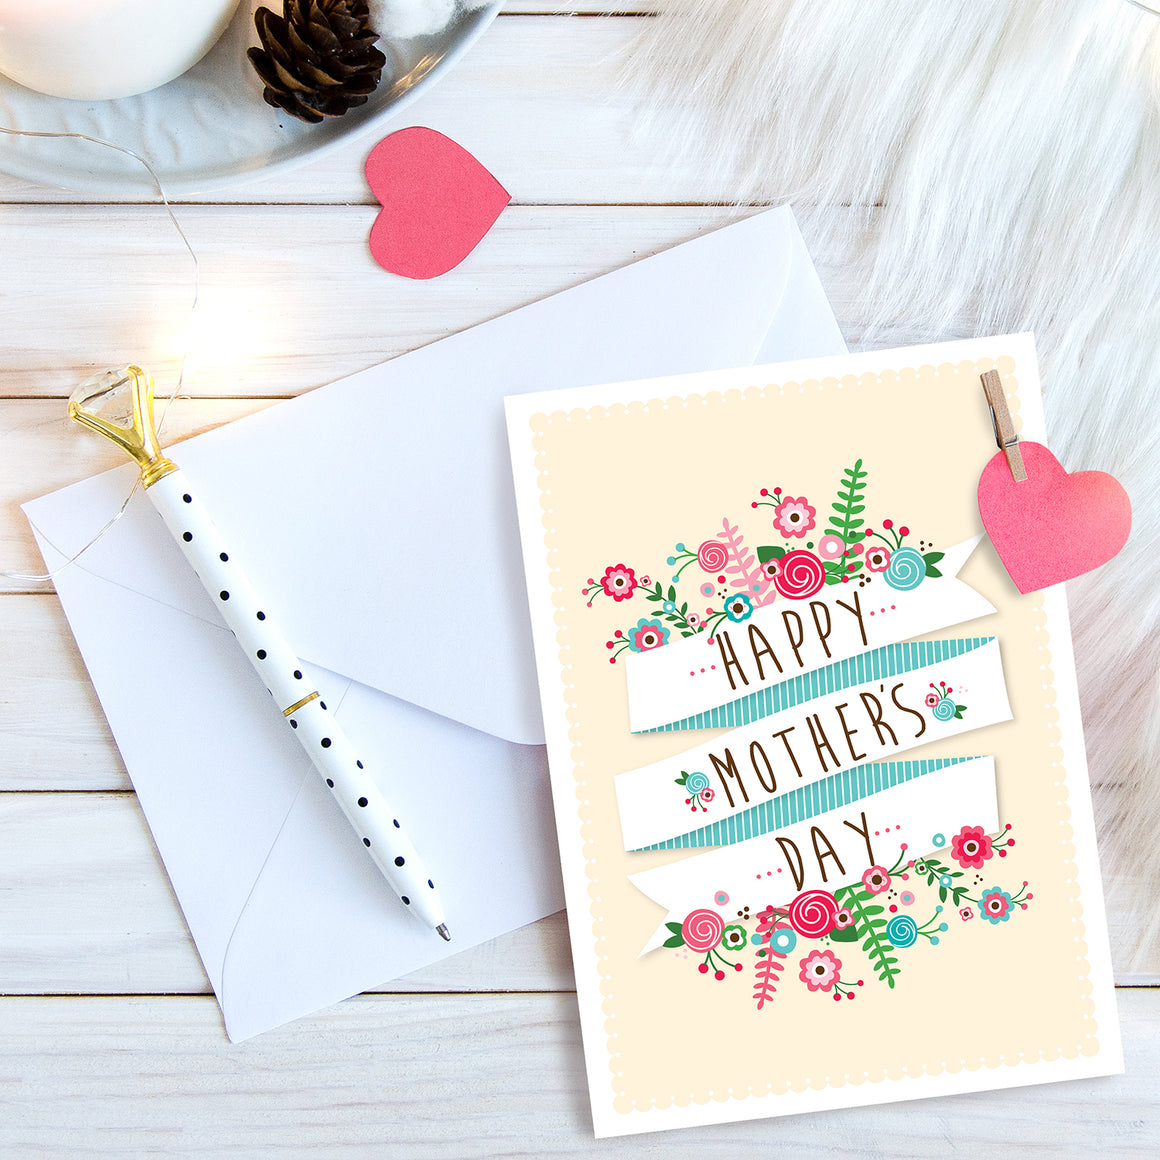 Mother's Day Greeting Card